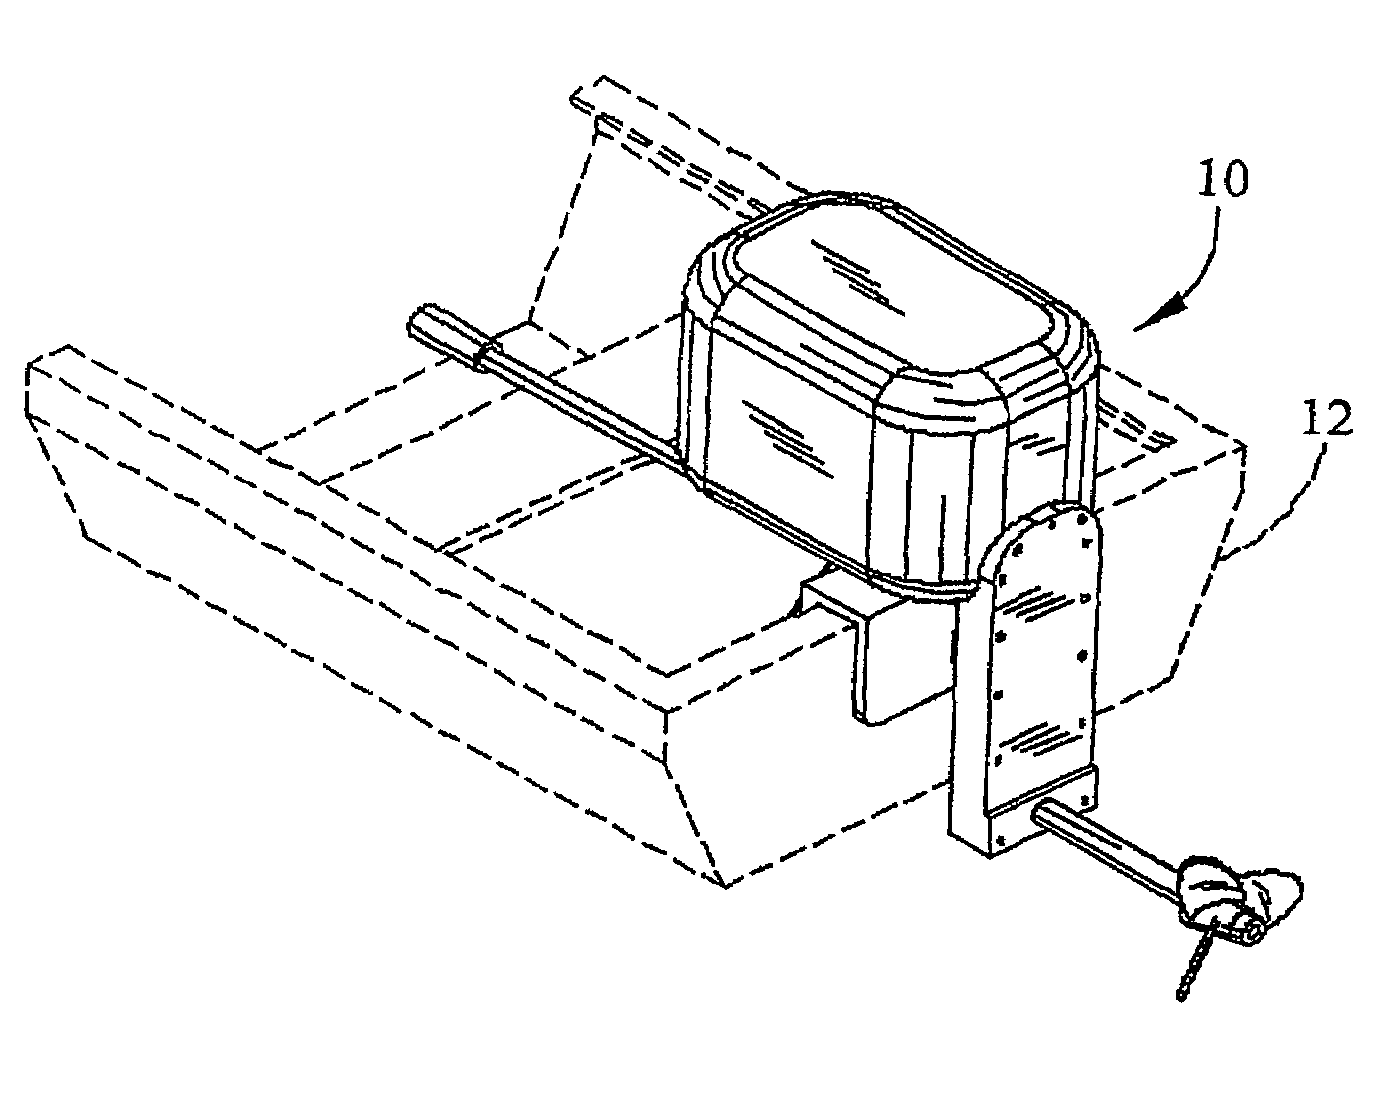 Method and apparatus for air cooled outboad motor for small marine craft